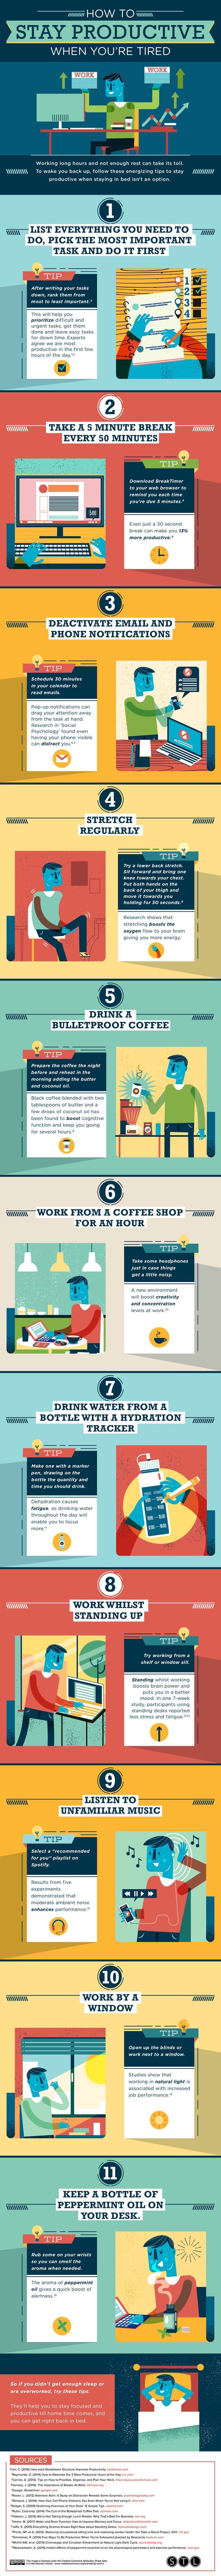 How to stay productive when you are tired at work